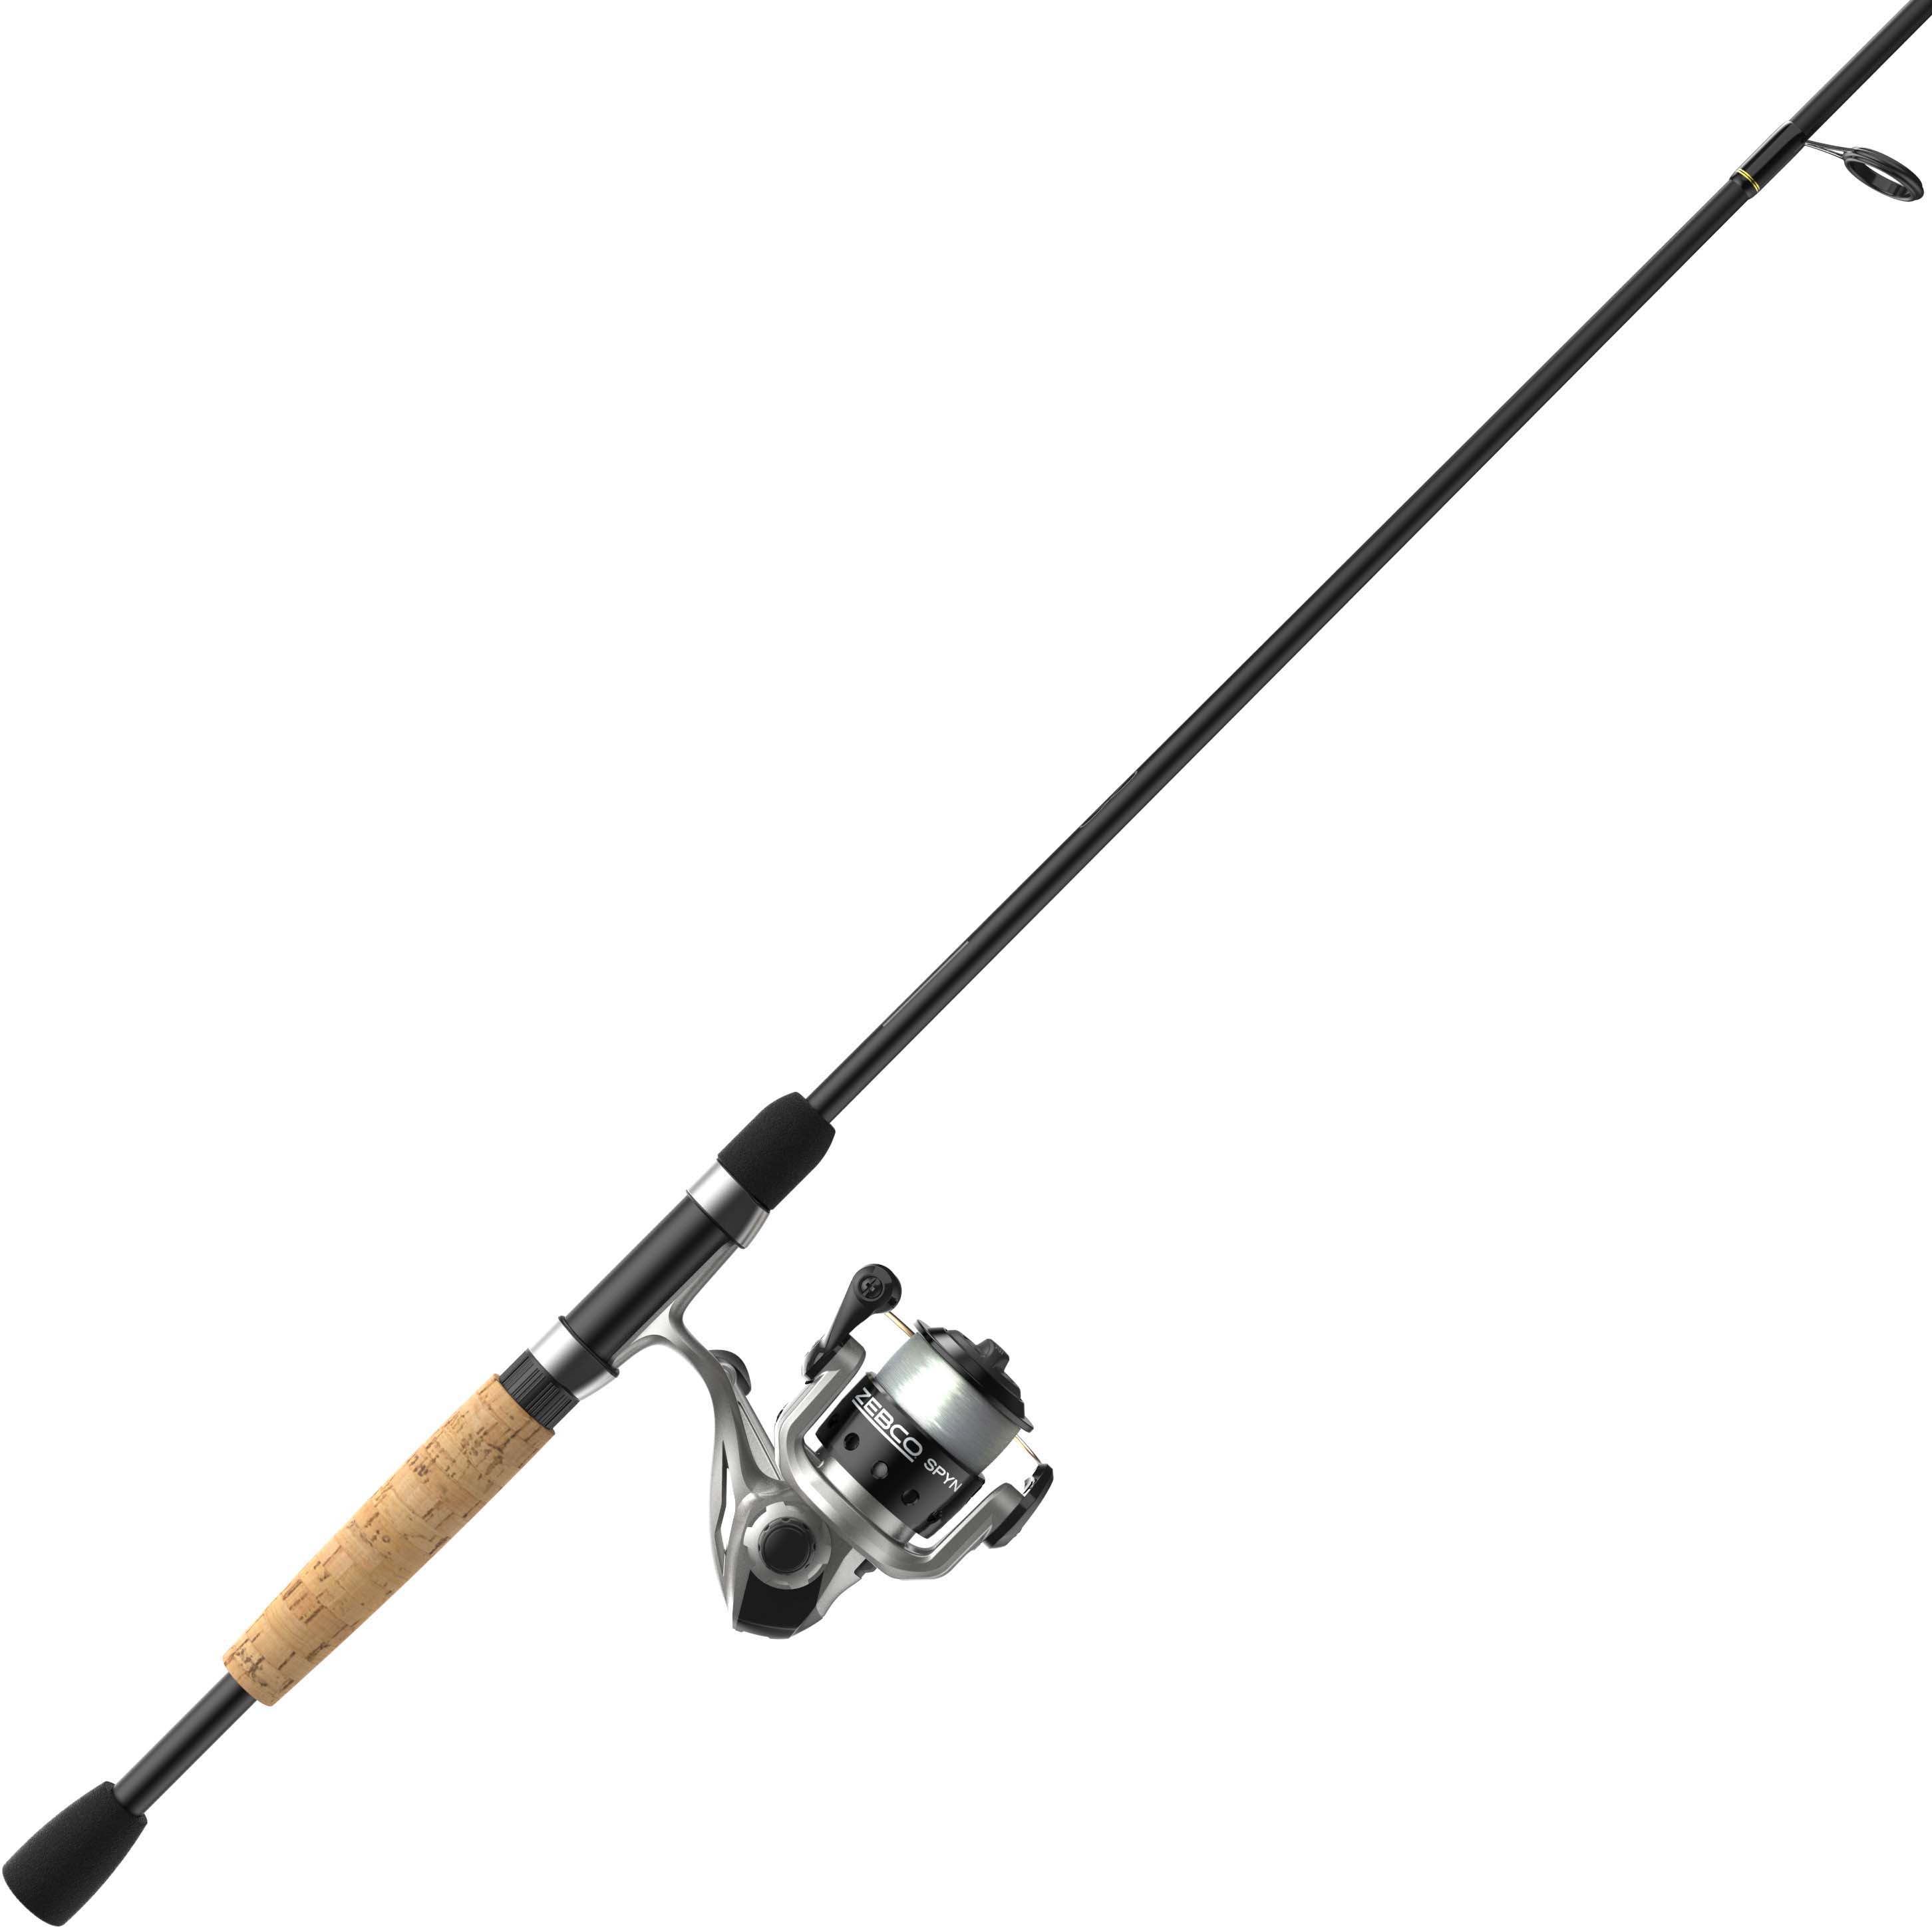 Zebco Spyn Spinning Combo Rod  30% Off Free Shipping over $49!